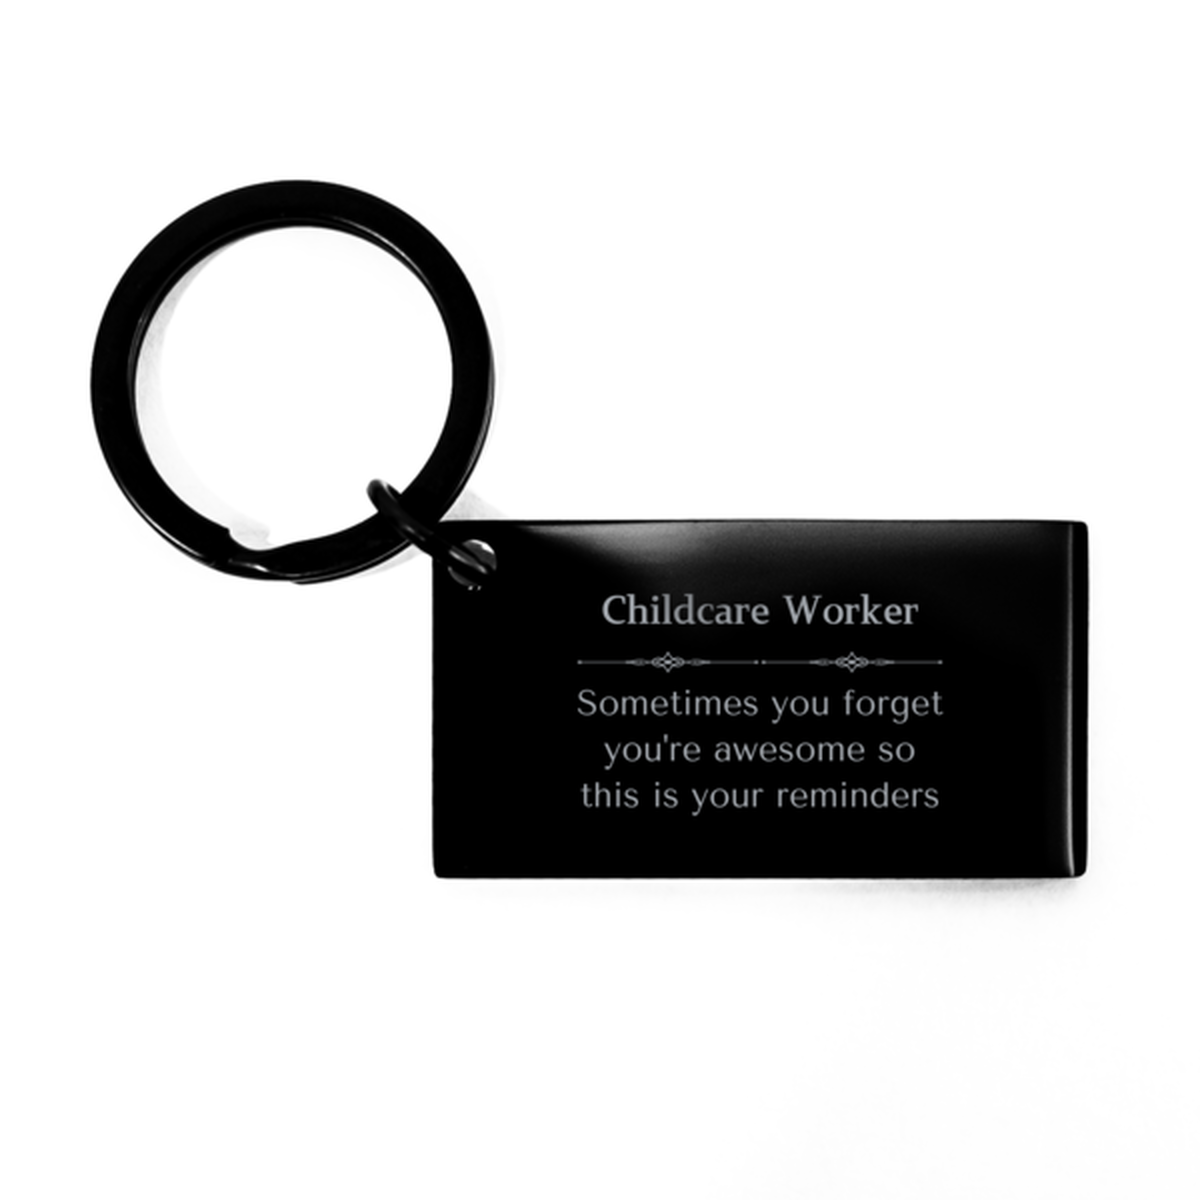 Sentimental Childcare Worker Keychain, Director Sometimes you forget you're awesome so this is your reminders, Graduation Christmas Birthday Gifts for Childcare Worker, Men, Women, Coworkers